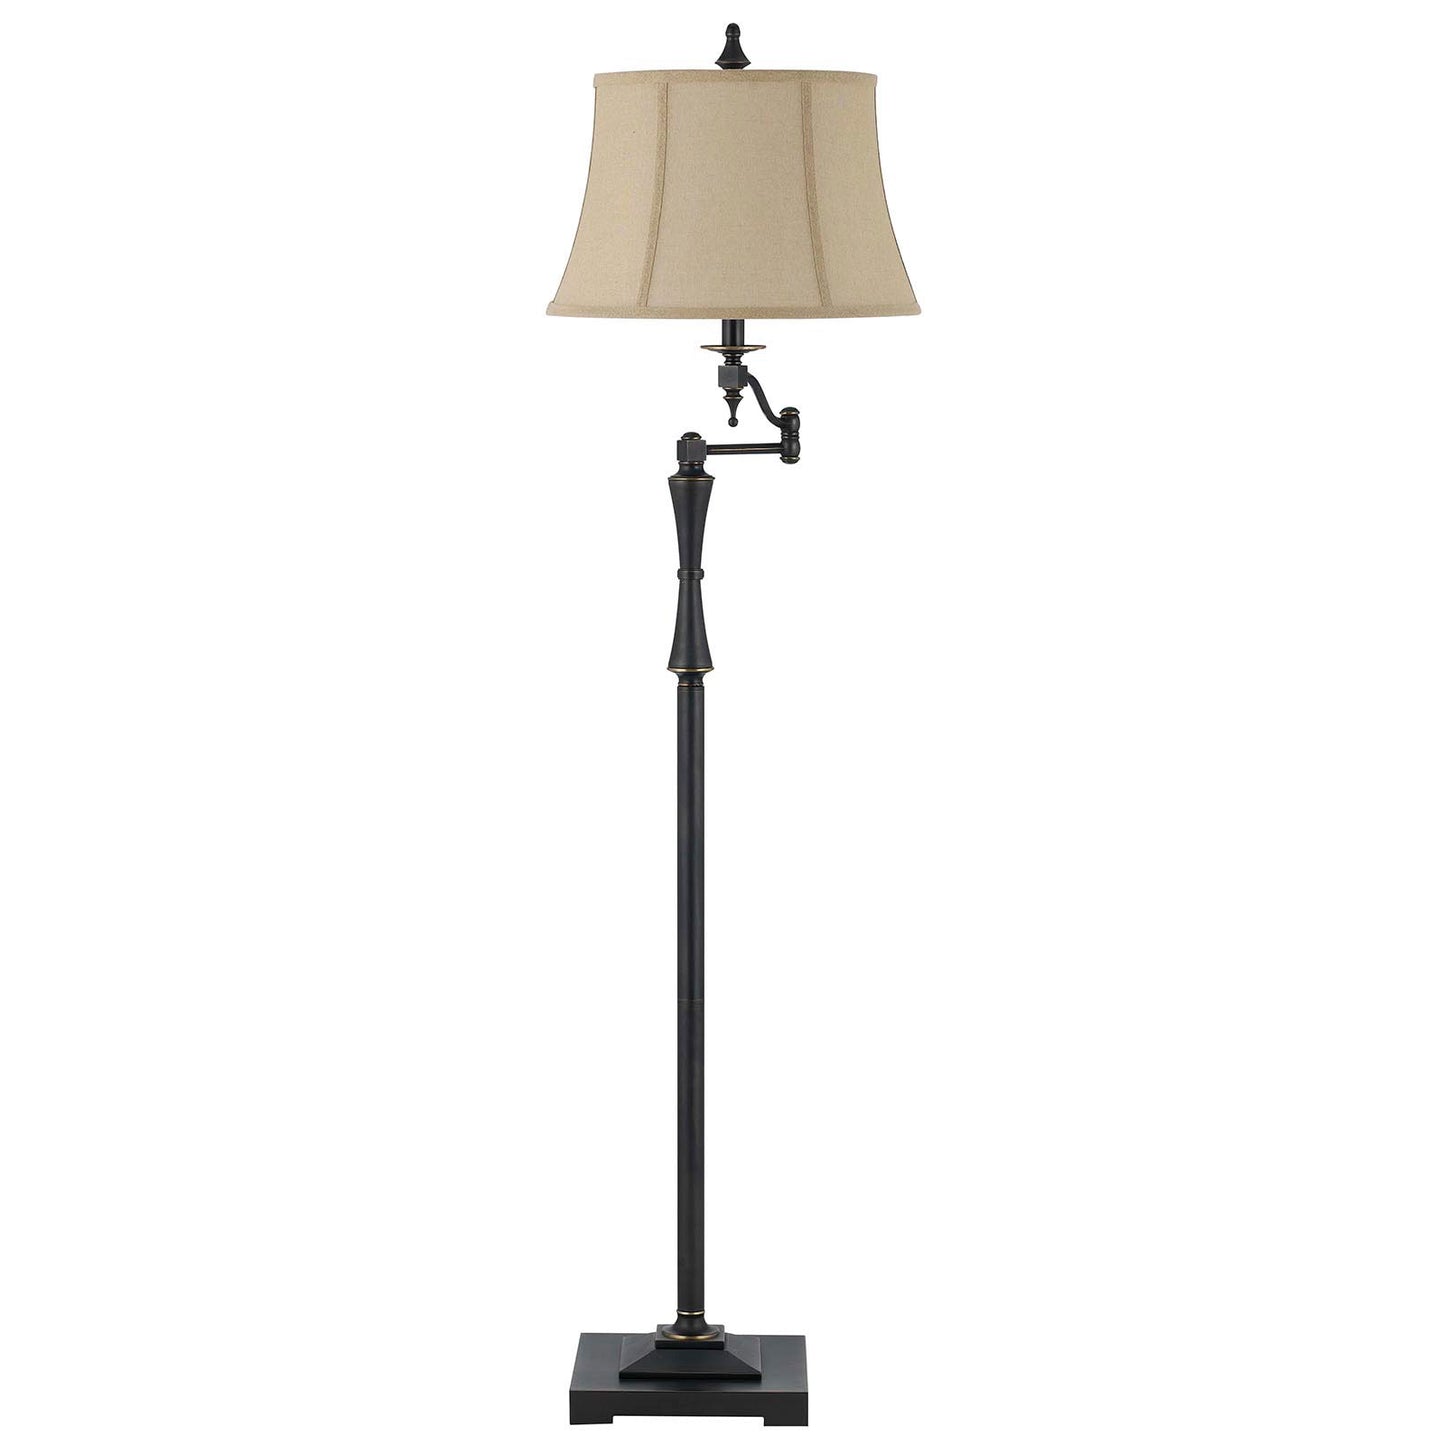 61" Bronze Swing Arm Floor Lamp With Brown Square Shade